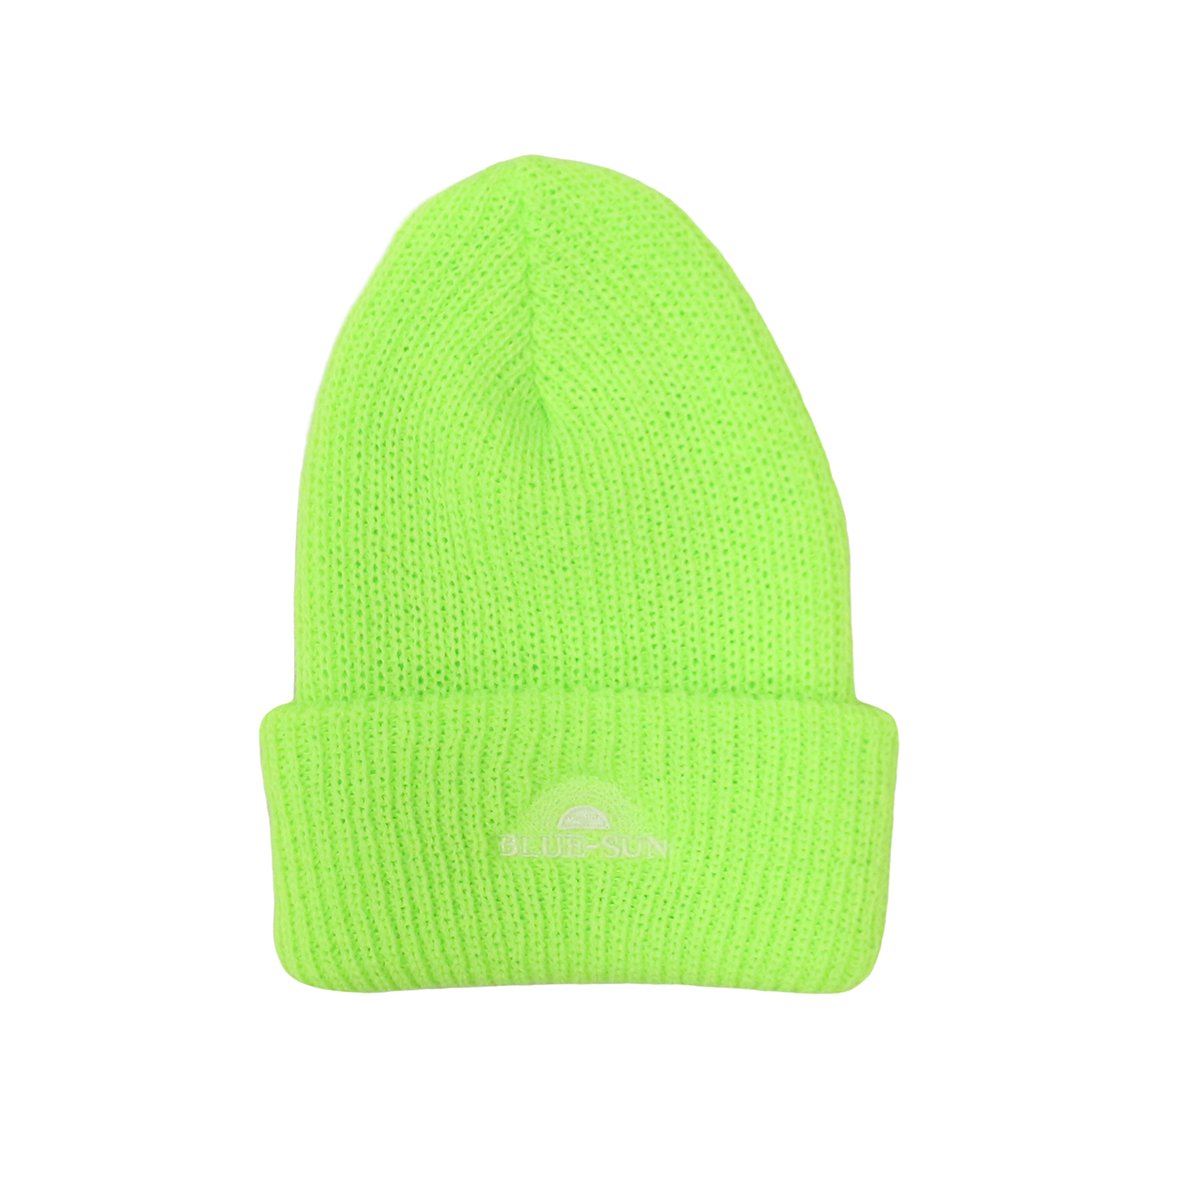 LOOSE GUAGE BEANIE 【BRIGHT LIME】